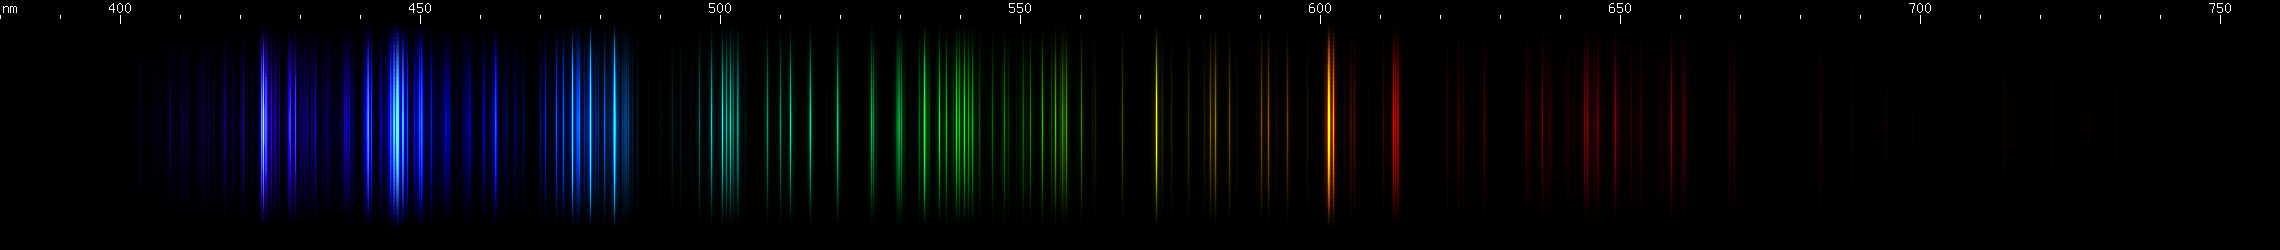 Spectral Lines of Manganese